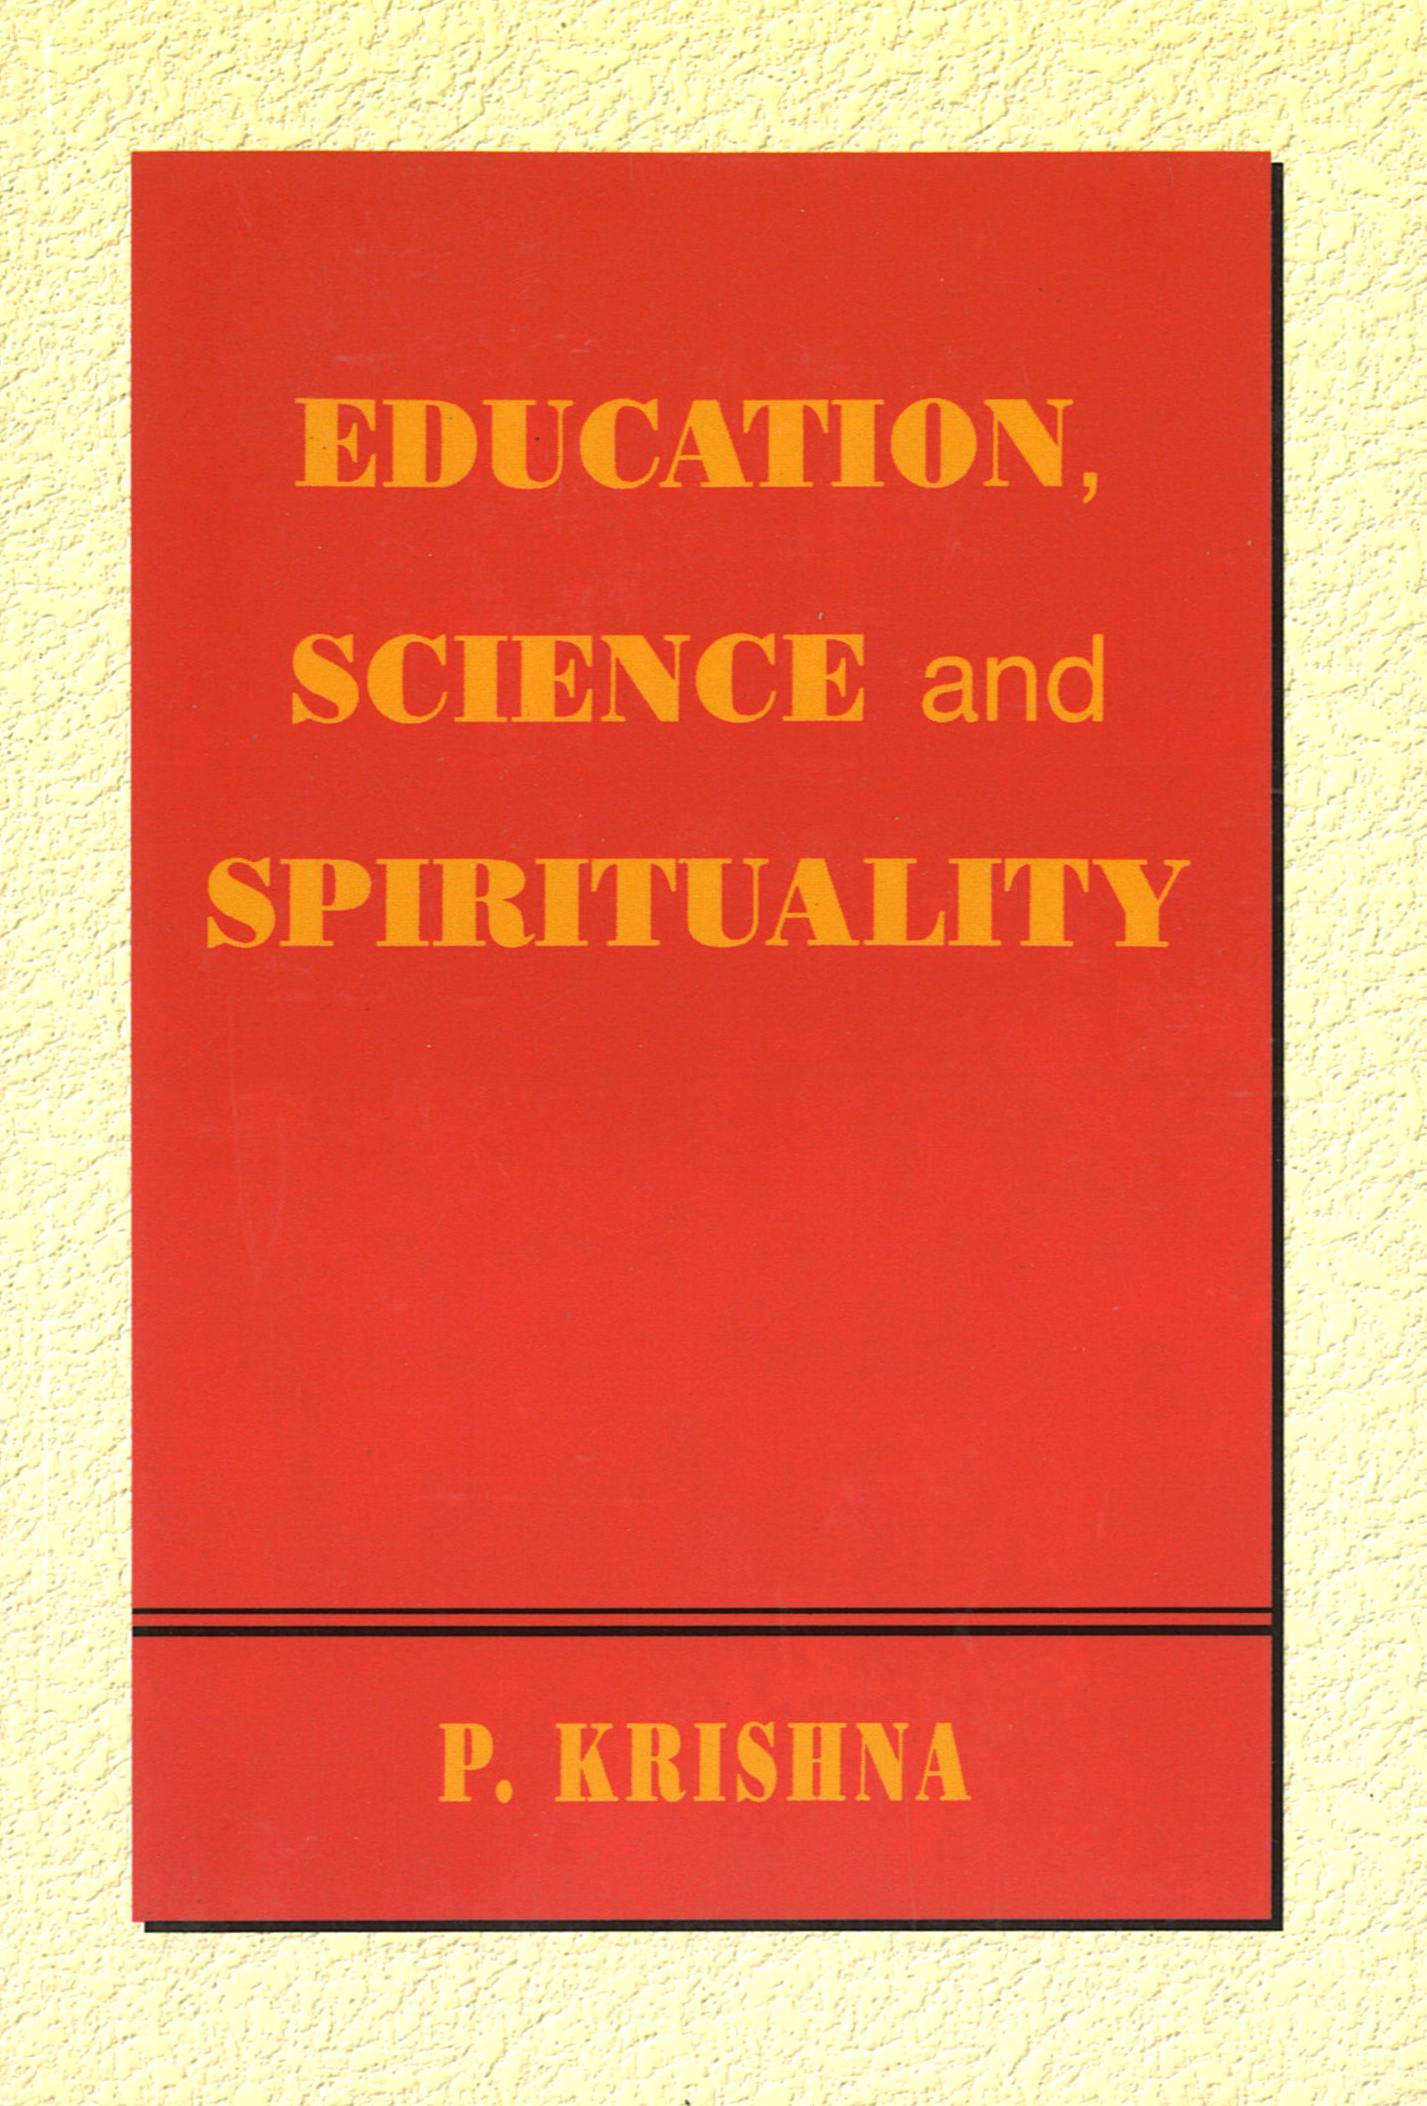 Education, Science and Spirituality